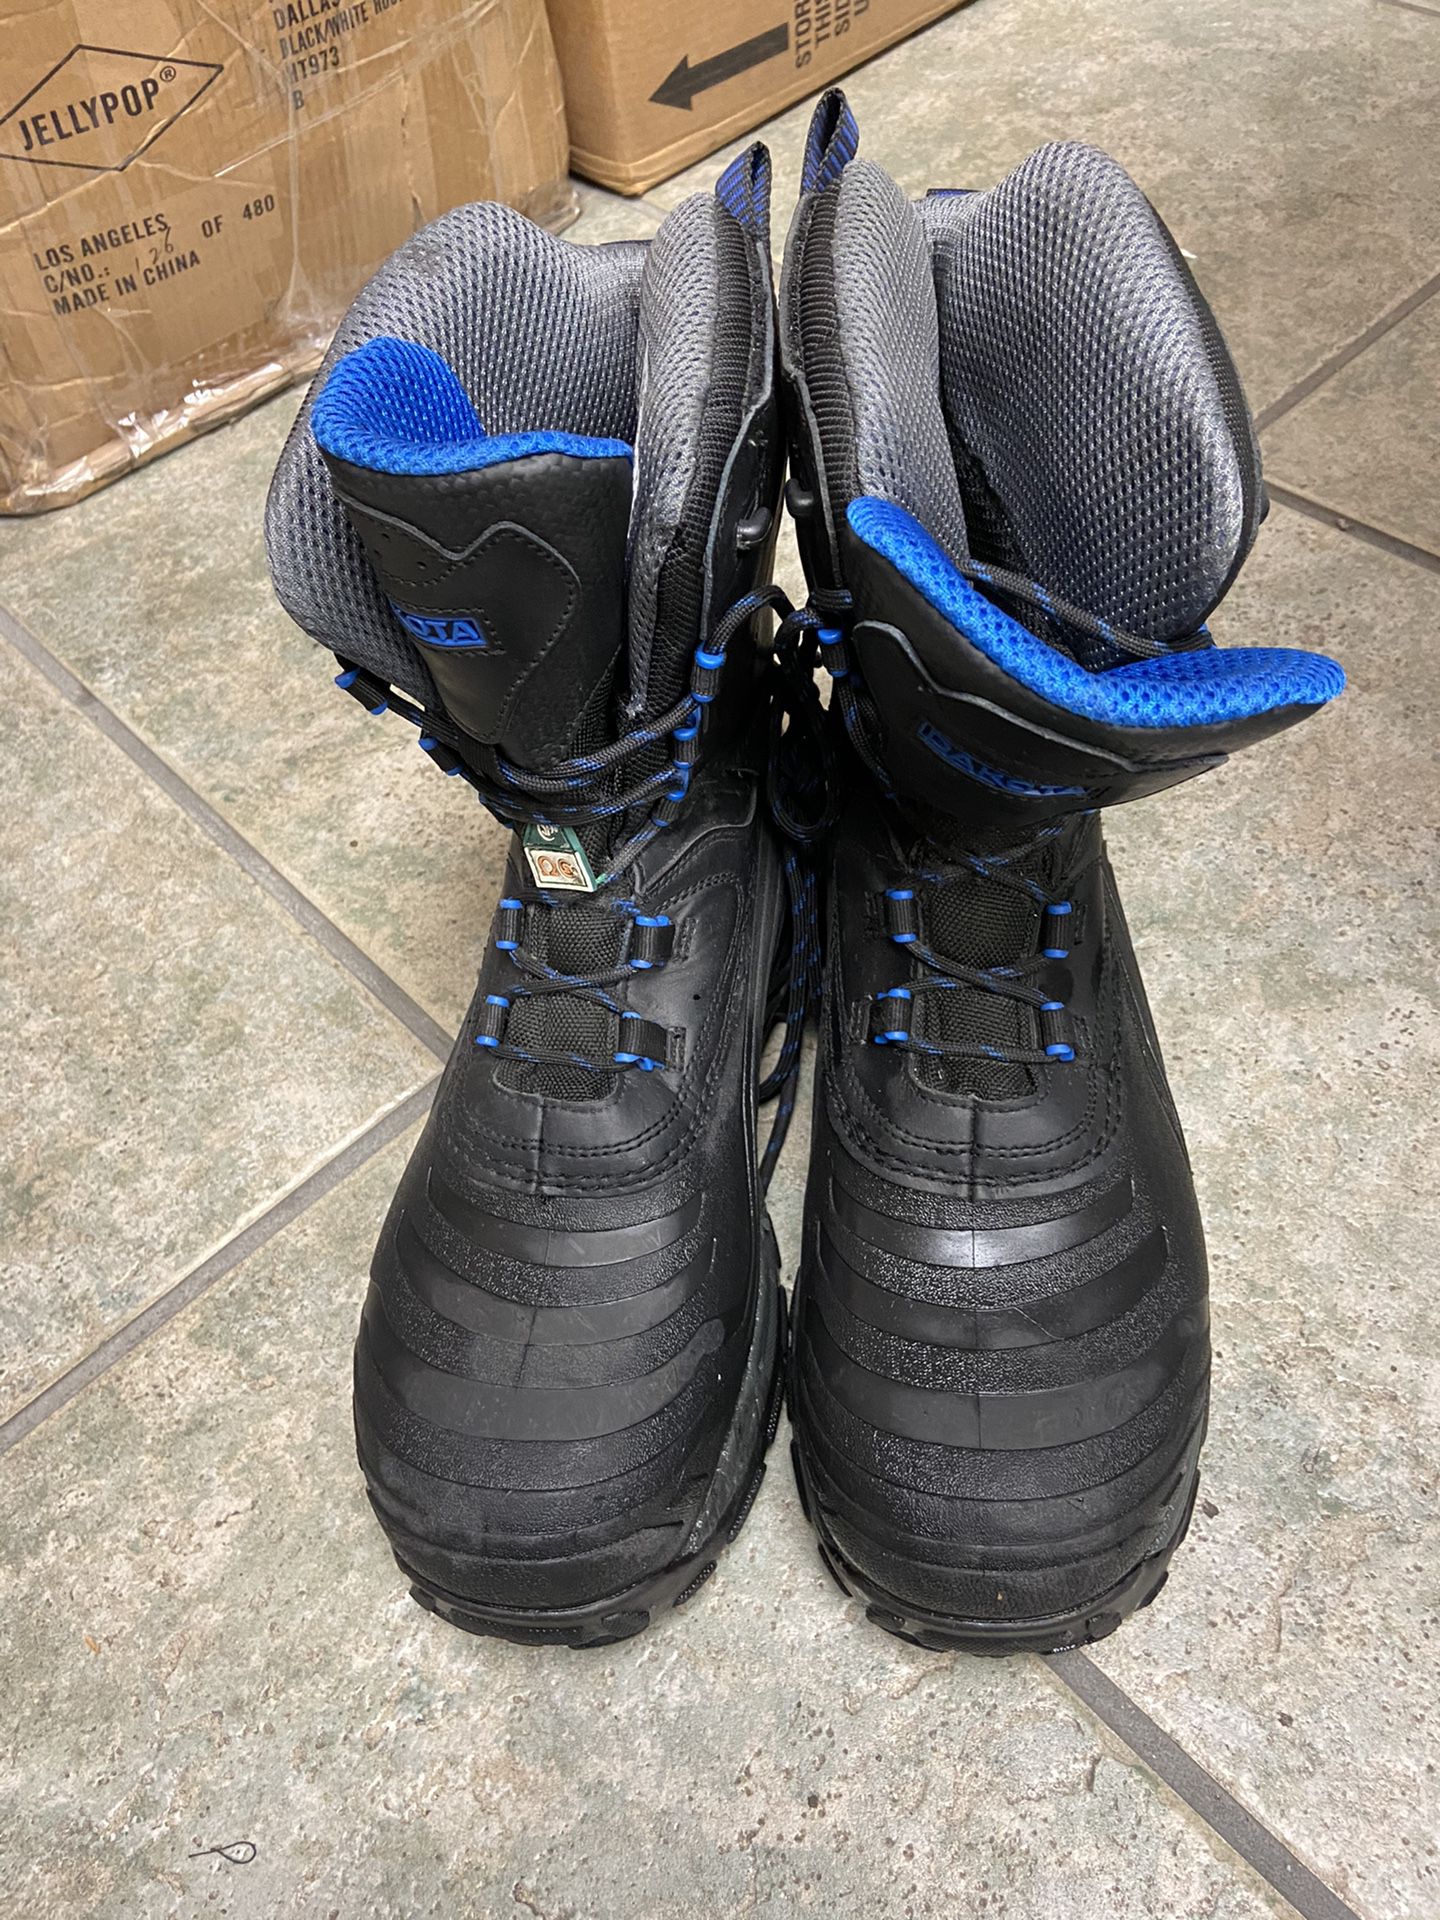 Dakota men’s work boot thermoelectric boot sizes available 11 and 12